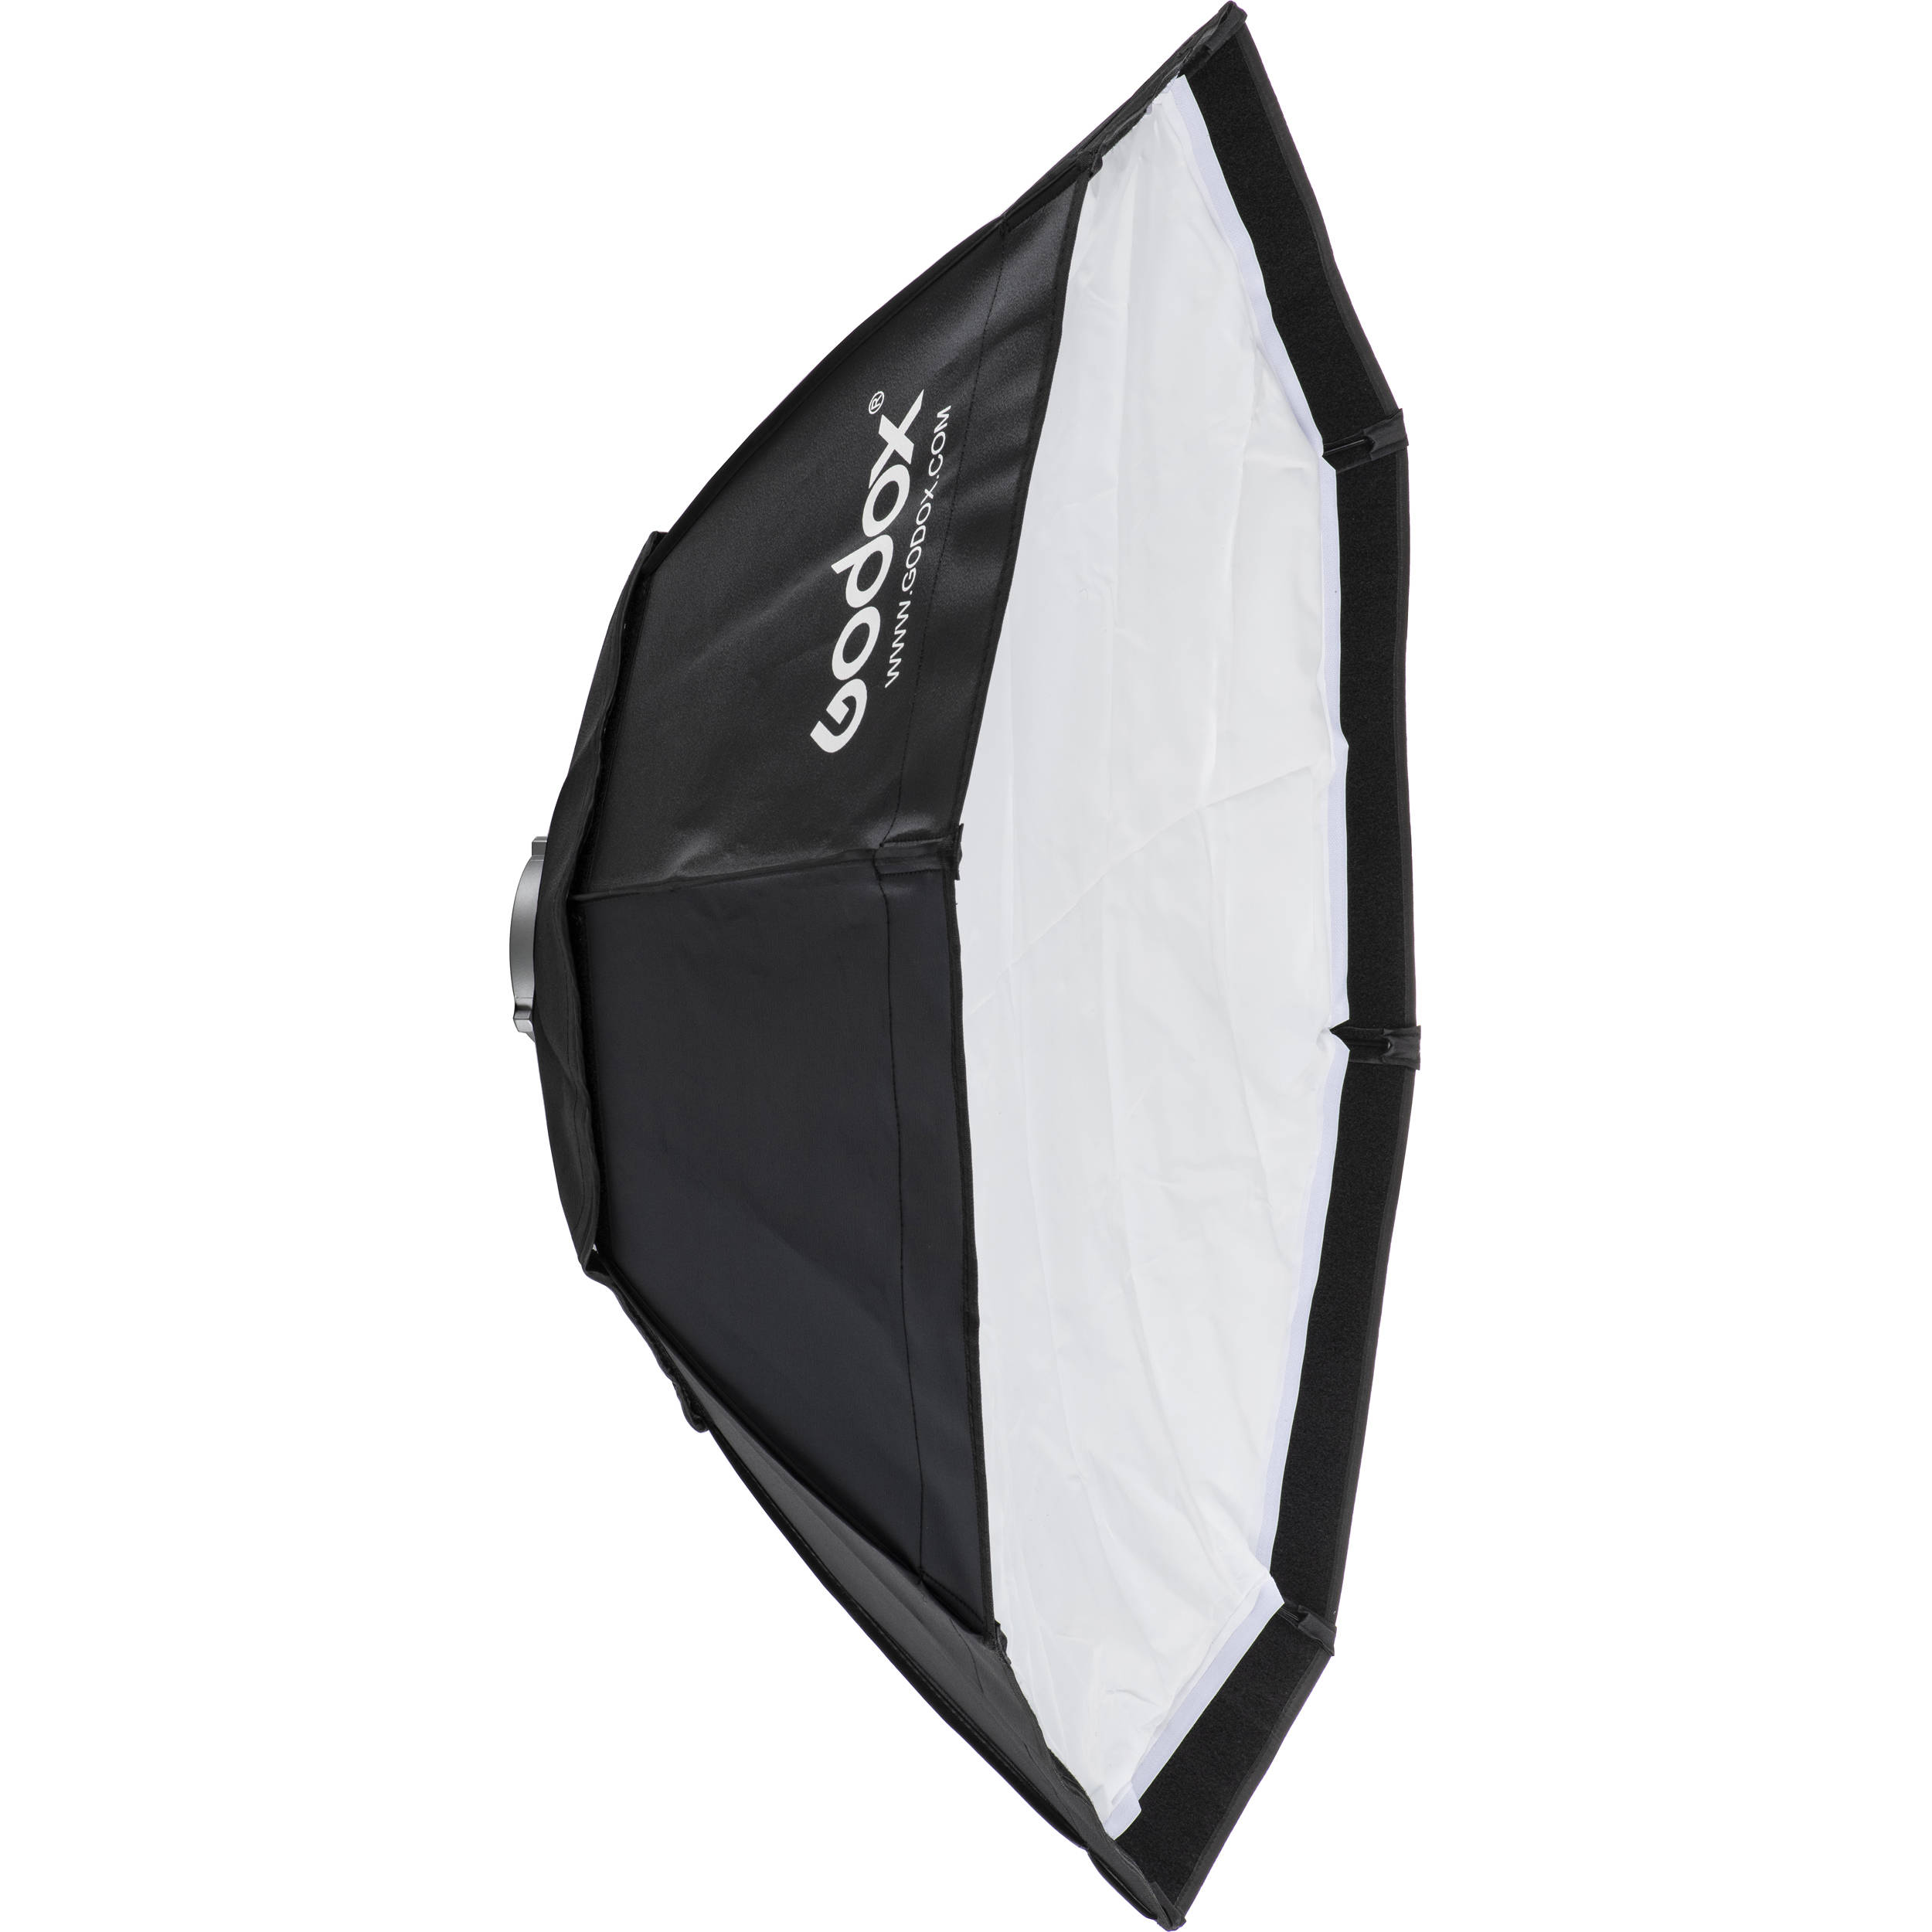 Godox Octa Softbox with Bowens Speed Ring and Grid (37.4